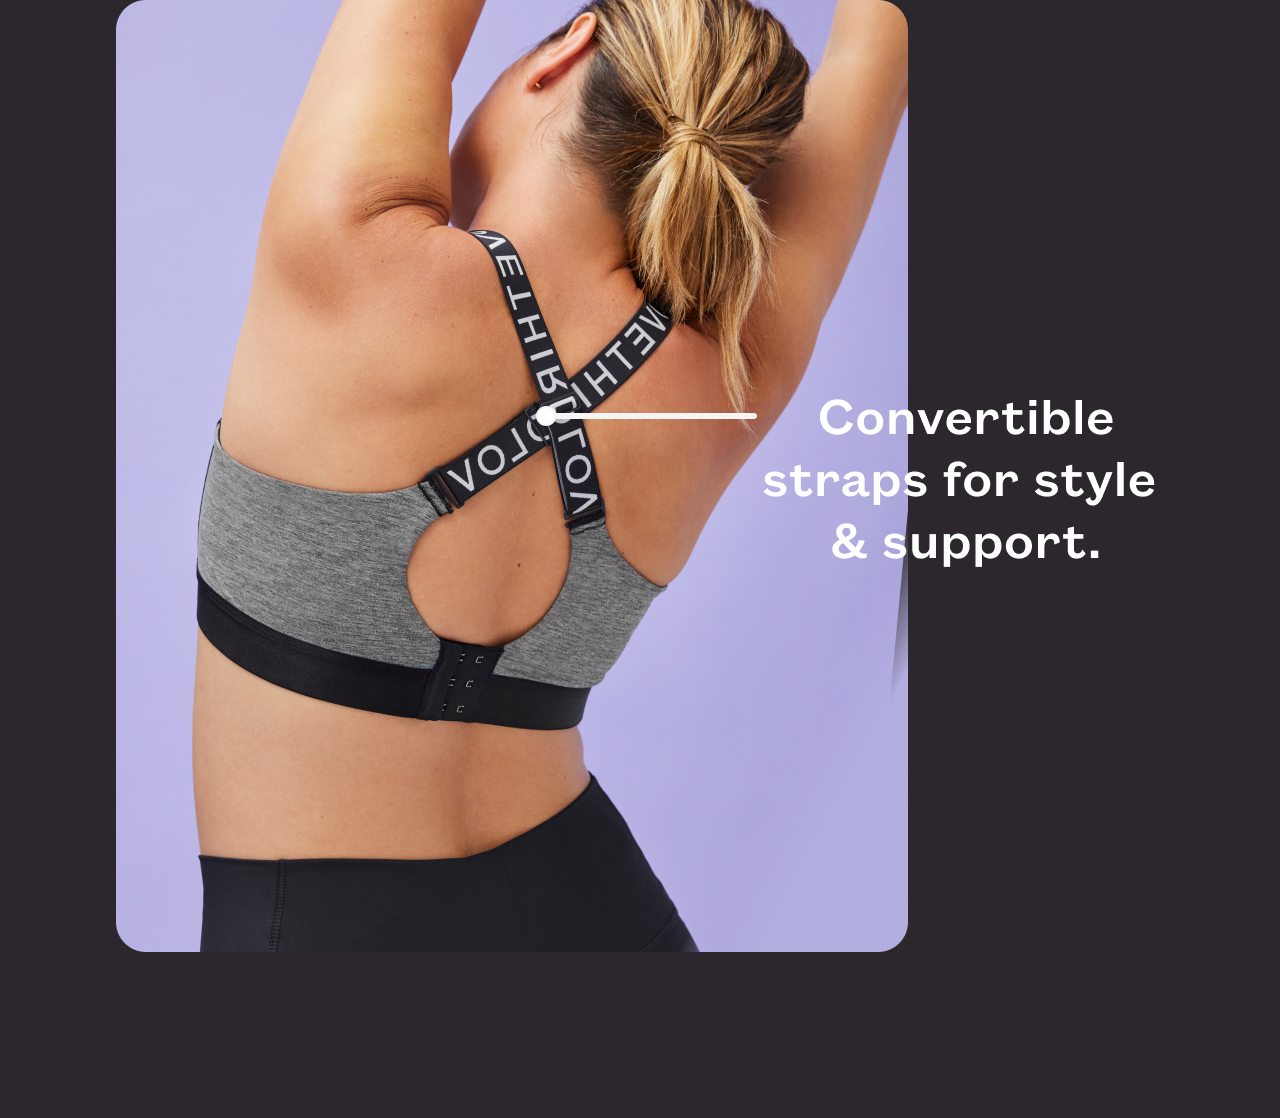 Convertible straps for style & support